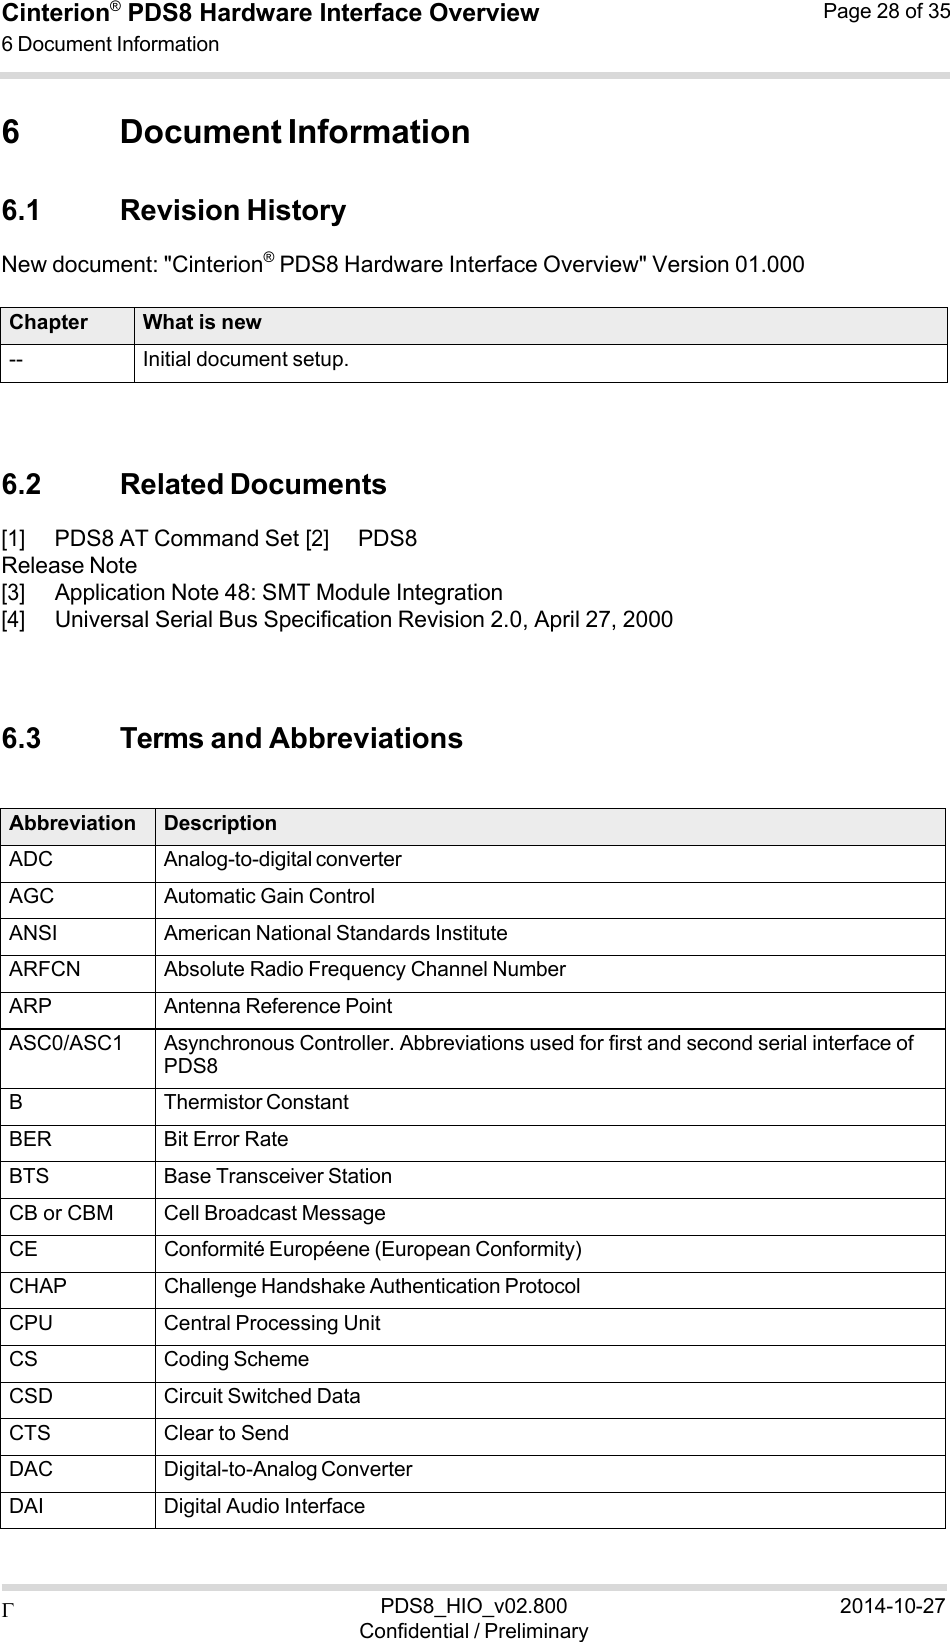  PDS8_HIO_v02.800Confidential / Preliminary2014-10-27Cinterion®  PDS8 Hardware Interface Overview 6 Document Information Page 28 of 35   6 Document Information  6.1 Revision History New document: &quot;Cinterion® PDS8 Hardware Interface Overview&quot; Version 01.000  Chapter What is new -- Initial document setup.    6.2 Related Documents [1] PDS8 AT Command Set [2] PDS8 Release Note [3] Application Note 48: SMT Module Integration [4] Universal Serial Bus Specification Revision 2.0, April 27, 2000    6.3 Terms and Abbreviations   Abbreviation Description ADC Analog-to-digital converterAGC Automatic Gain ControlANSI American National Standards InstituteARFCN Absolute Radio Frequency Channel NumberARP Antenna Reference PointASC0/ASC1 Asynchronous Controller. Abbreviations used for first and second serial interface of PDS8 B Thermistor Constant BER Bit Error Rate BTS Base Transceiver StationCB or CBM Cell Broadcast MessageCE Conformité Européene (European Conformity)CHAP Challenge Handshake Authentication ProtocolCPU Central Processing UnitCS Coding Scheme CSD Circuit Switched Data CTS Clear to Send DAC Digital-to-Analog ConverterDAI Digital Audio Interface 